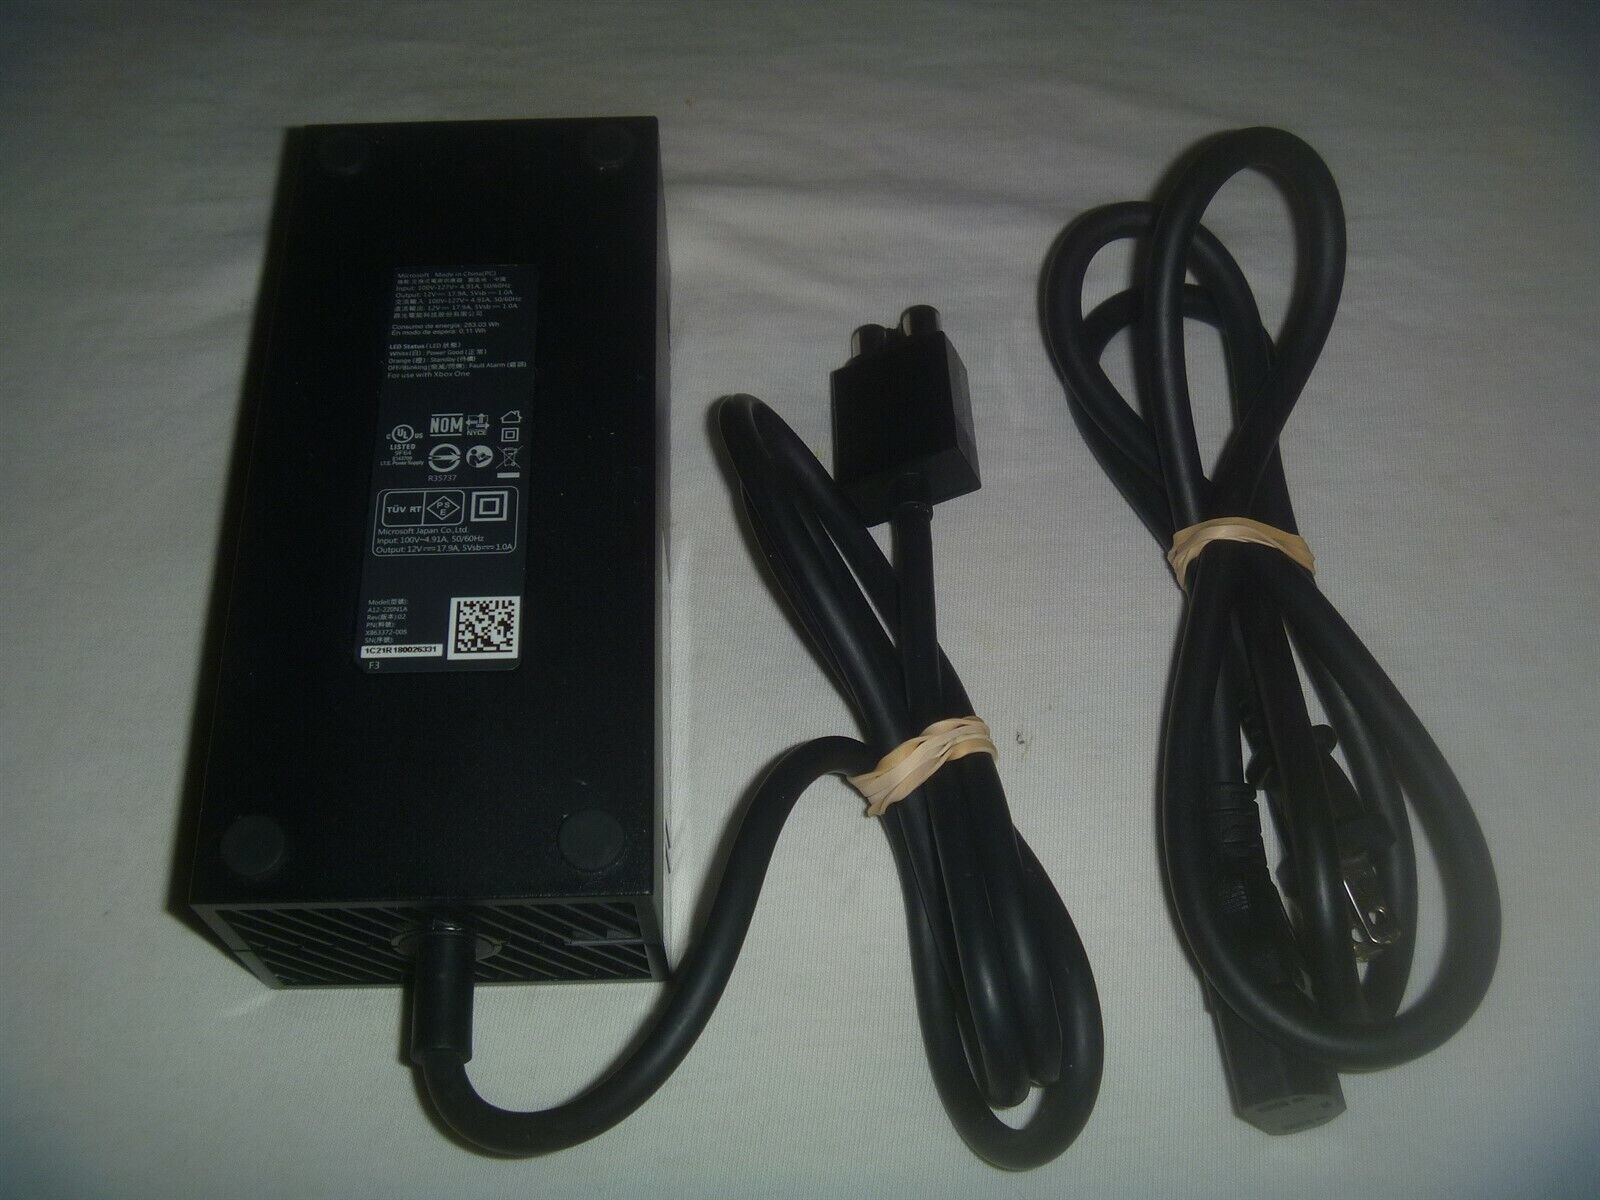 Official Genuine OEM Microsoft Xbox One Power Supply Brick & Cord AC Adapter - $28.01